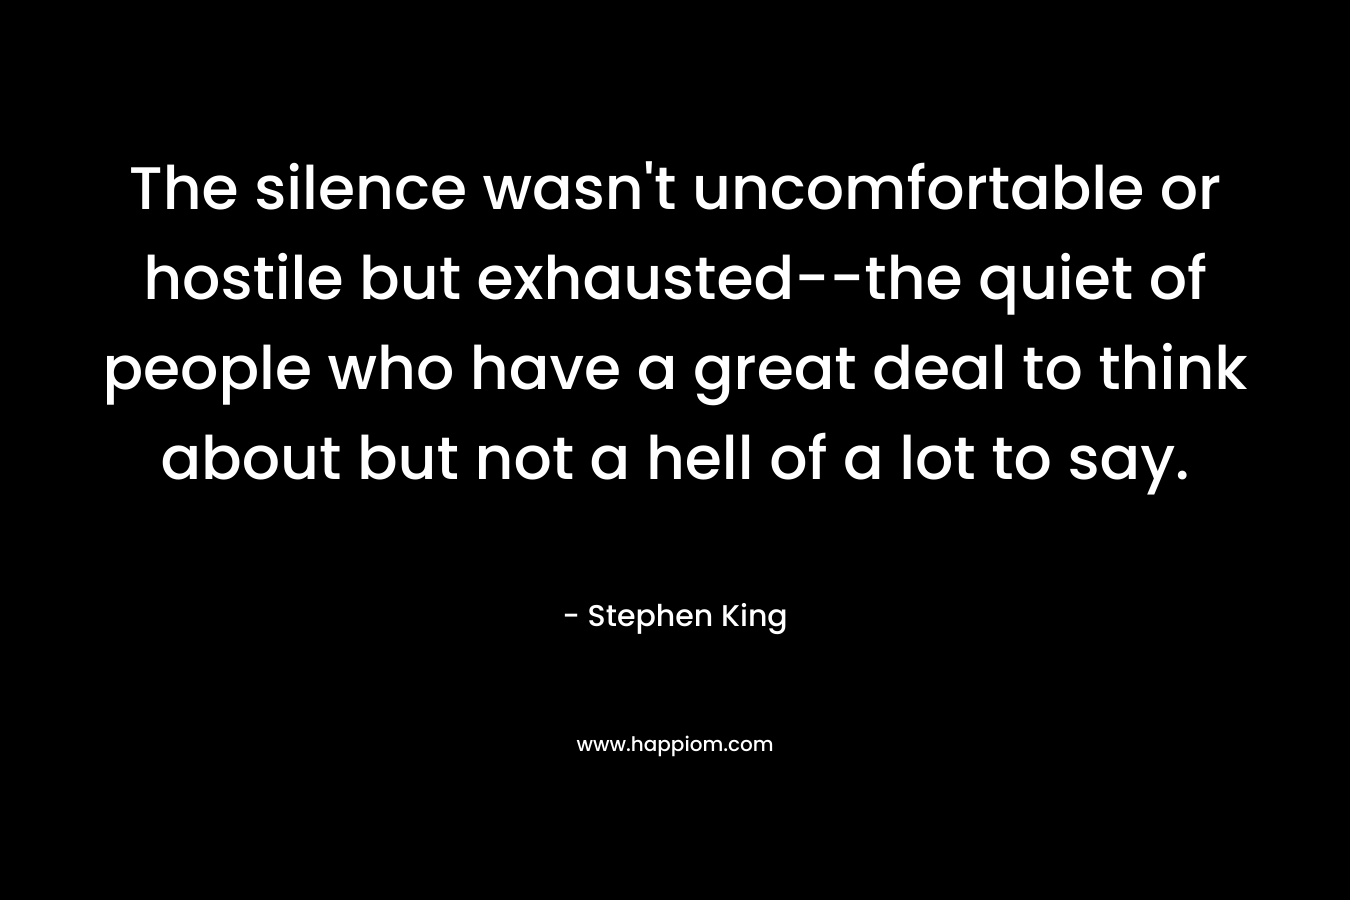 The silence wasn’t uncomfortable or hostile but exhausted–the quiet of people who have a great deal to think about but not a hell of a lot to say. – Stephen King